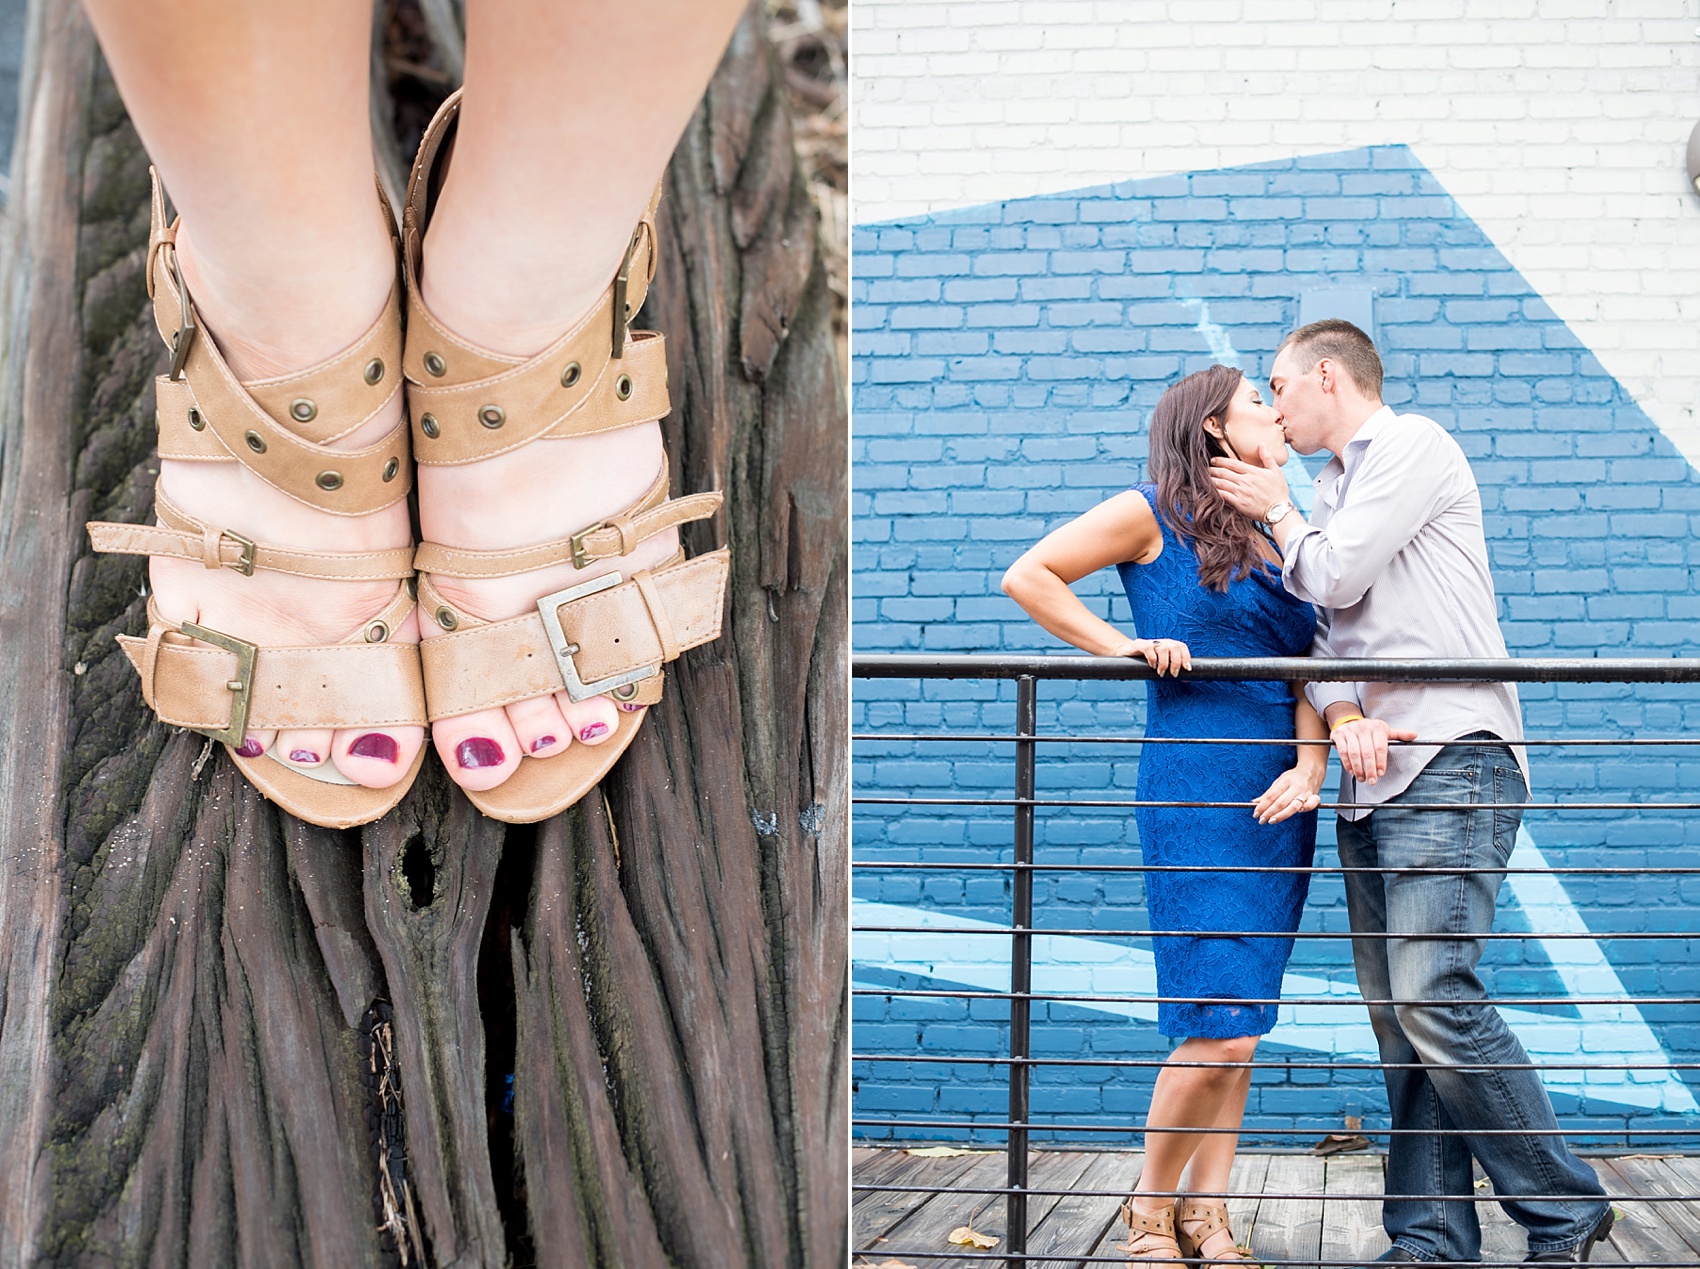 Downtown Raleigh urban engagement photos by Mikkel Paige Photography.